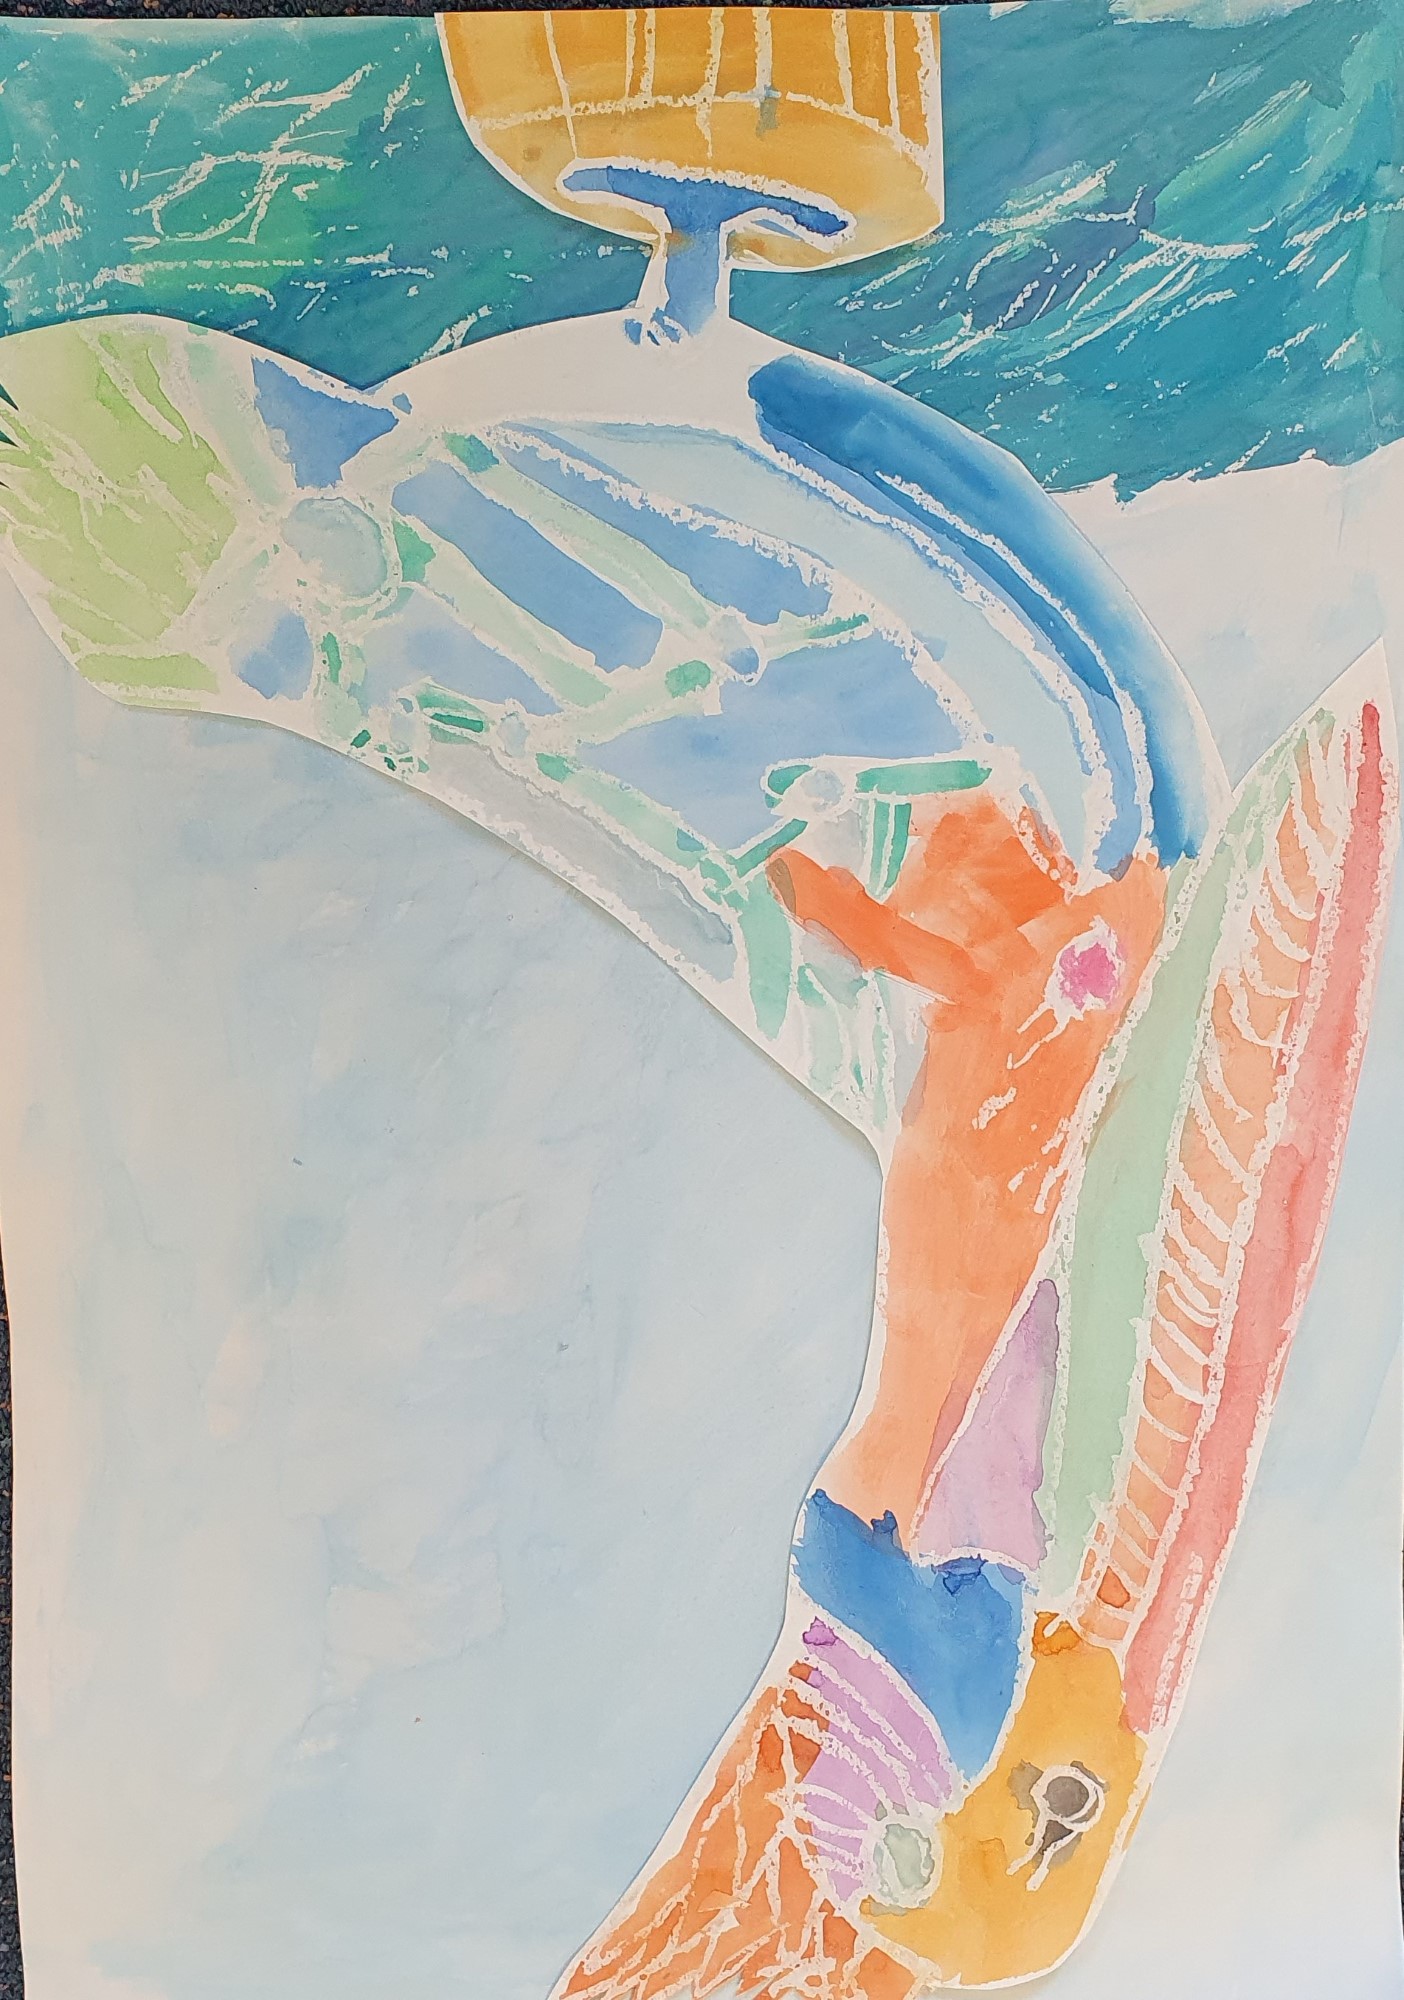 student artwork - Pelican on the water